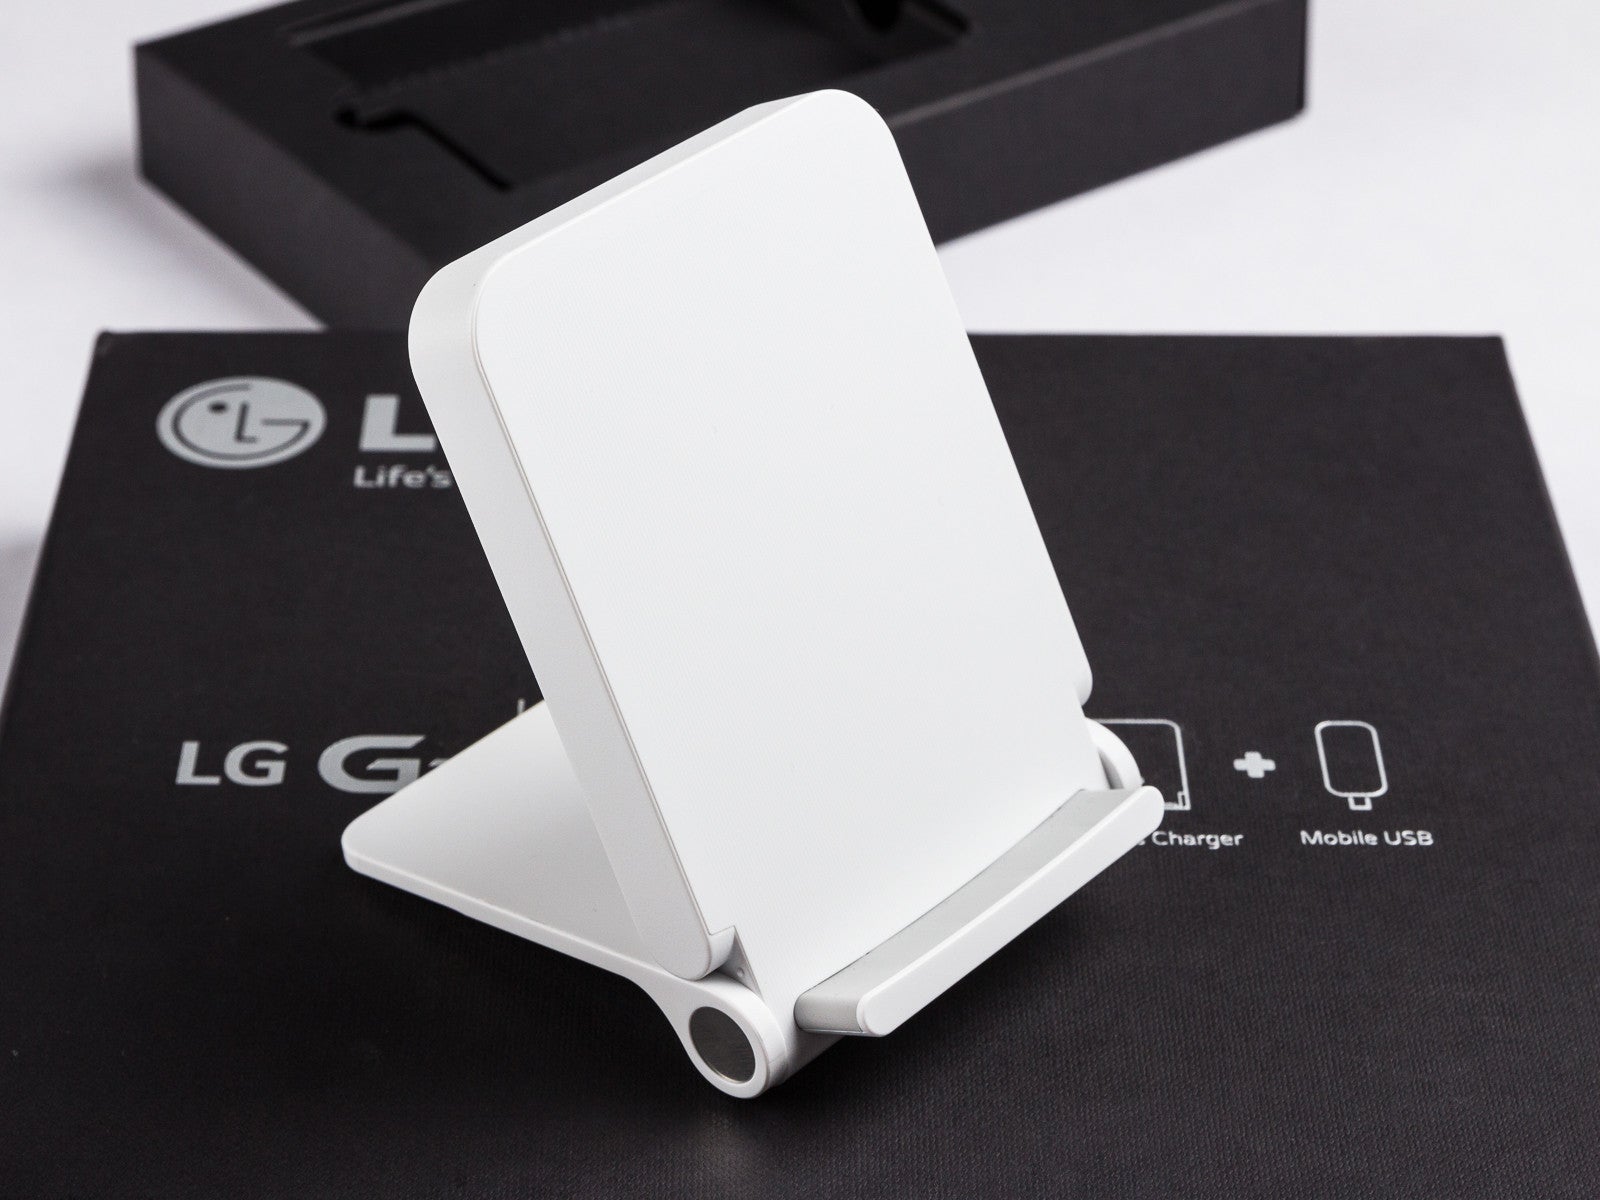 The LG WCD-100 Qi charger - LG G3 Wireless Charger (WCD-100) hands-on